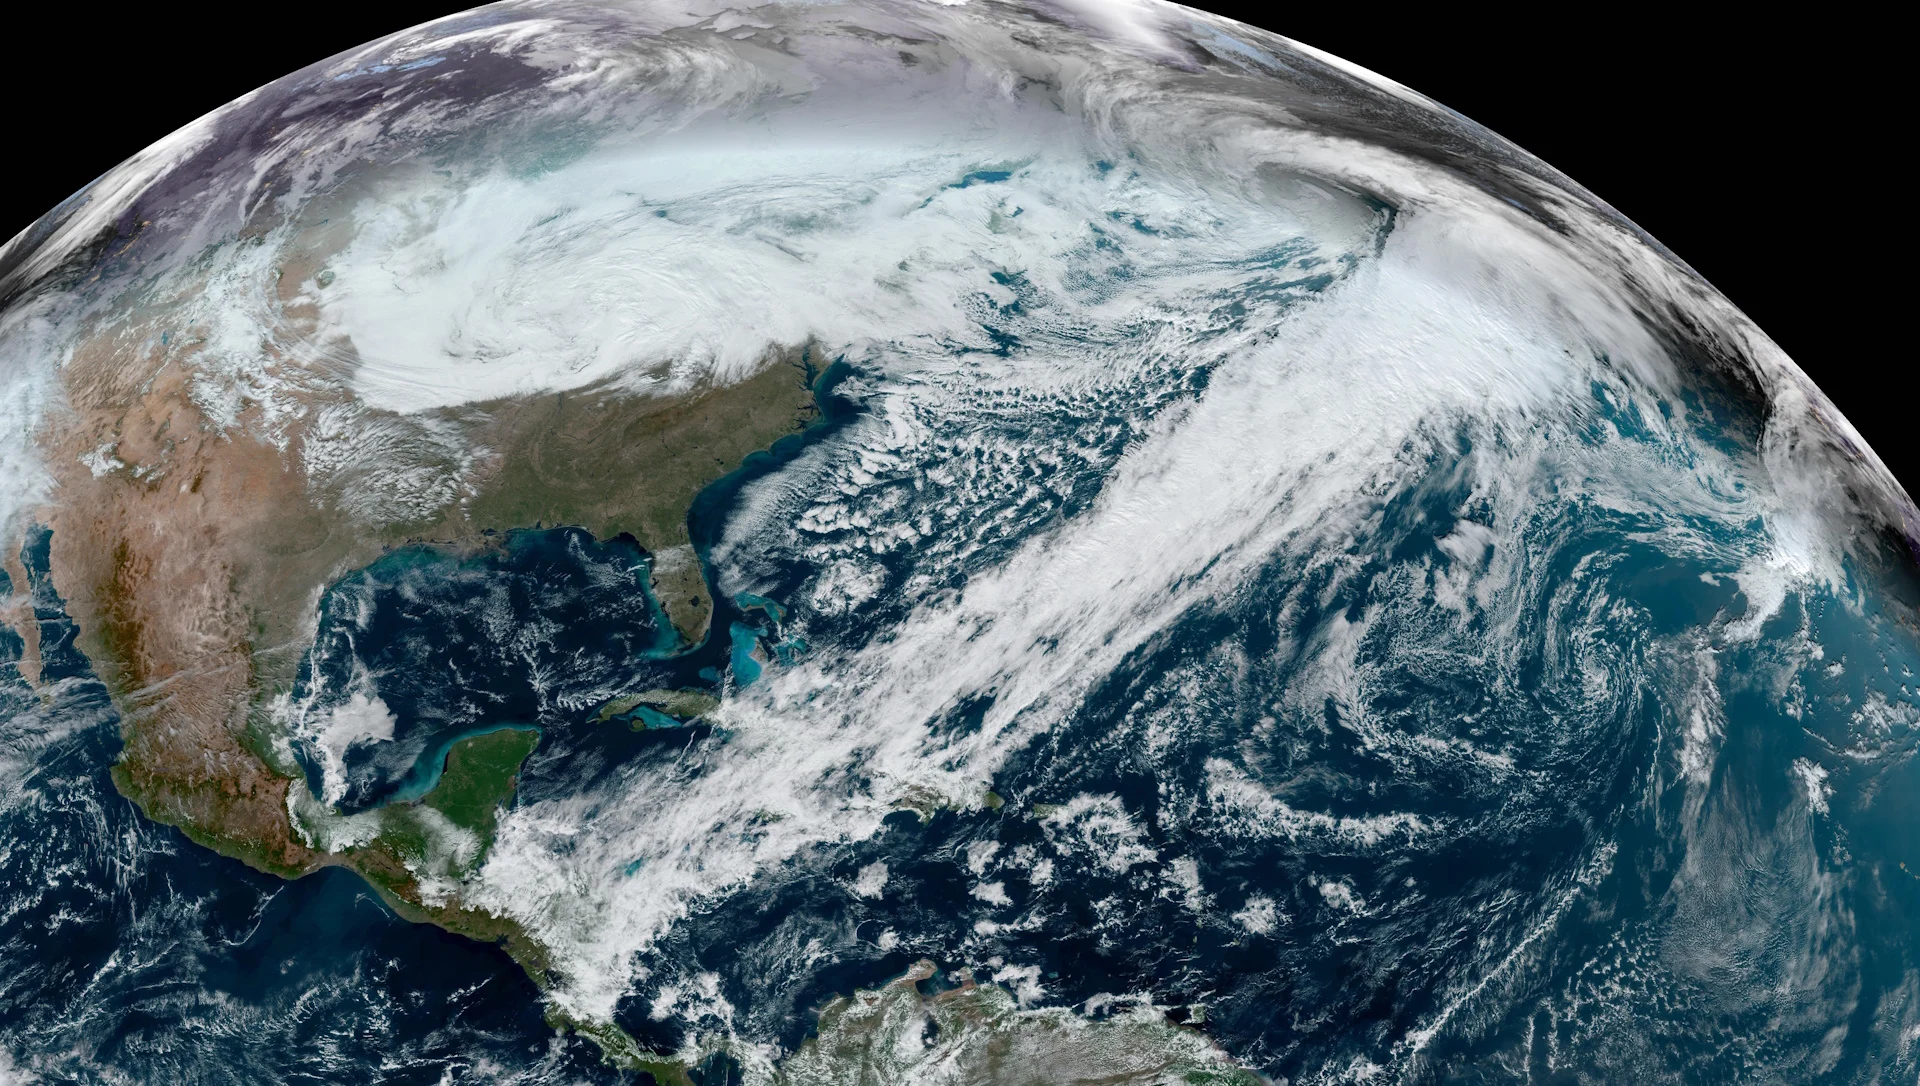 Enormous storms, gravity waves–this is your amazing planet today